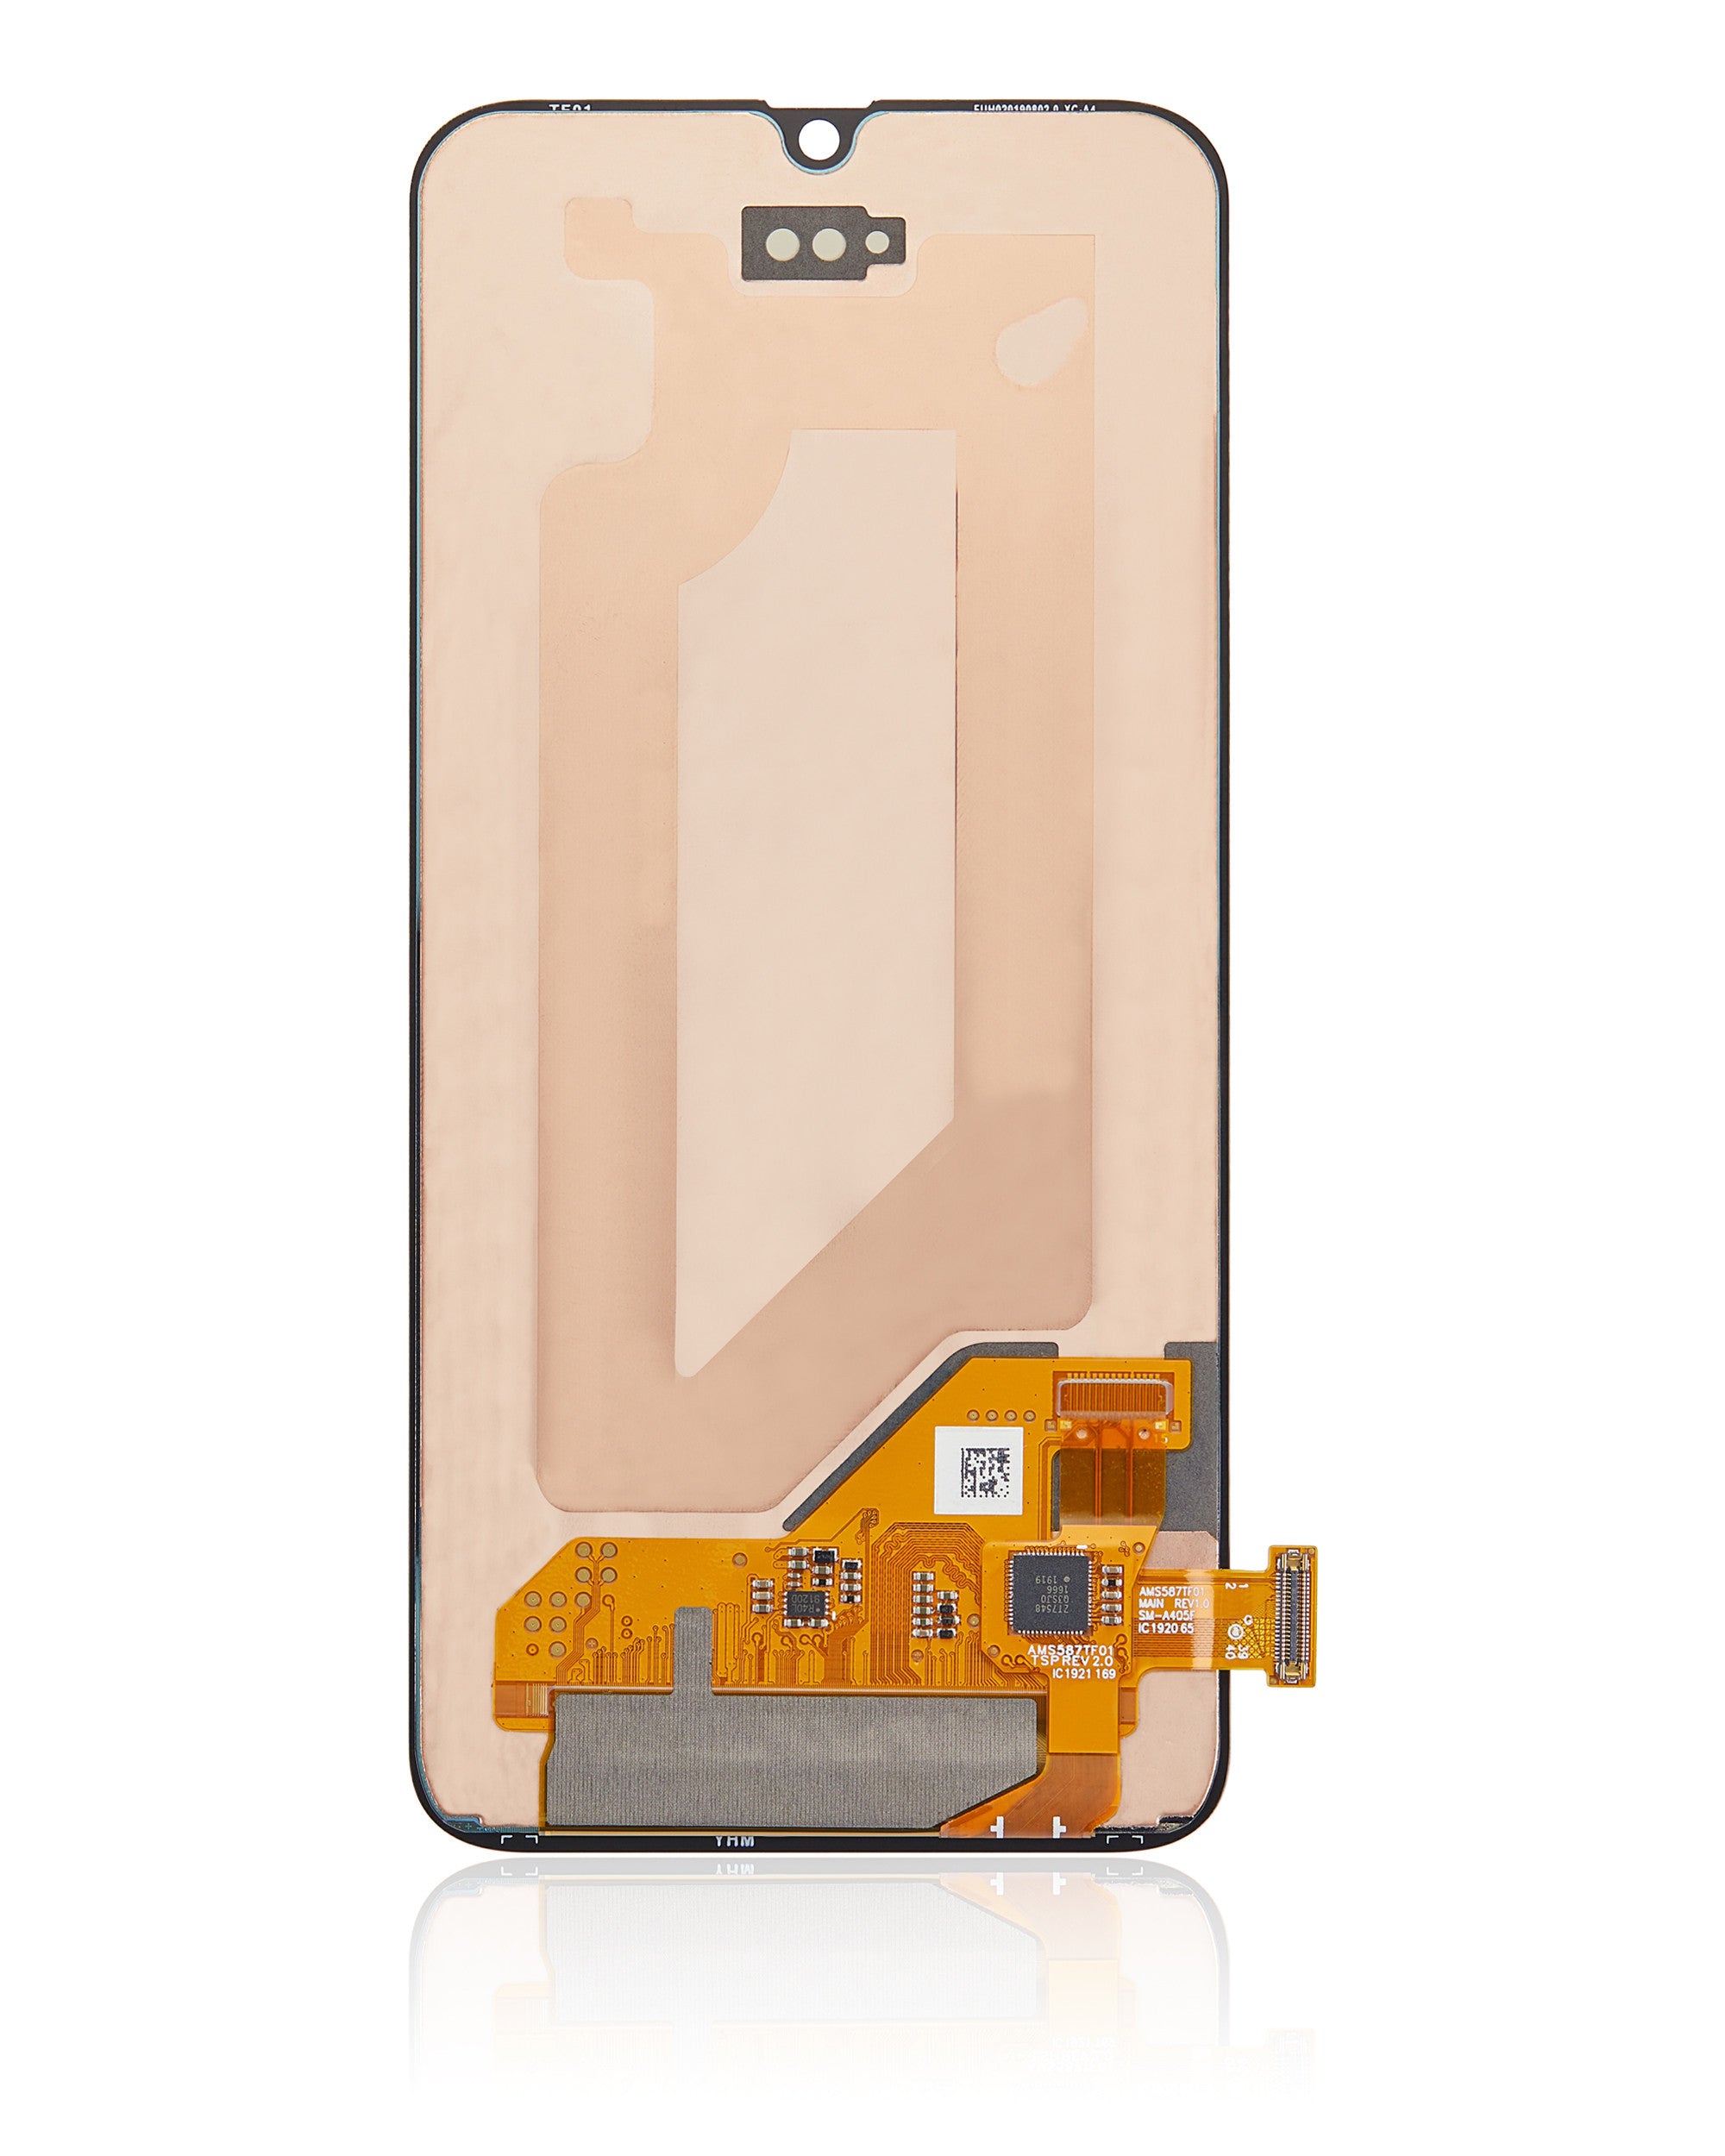 For Samsung Galaxy A40  (A405 / 2019) LCD Screen Replacement Without Frame (Aftermarket Pro) (All Colors)